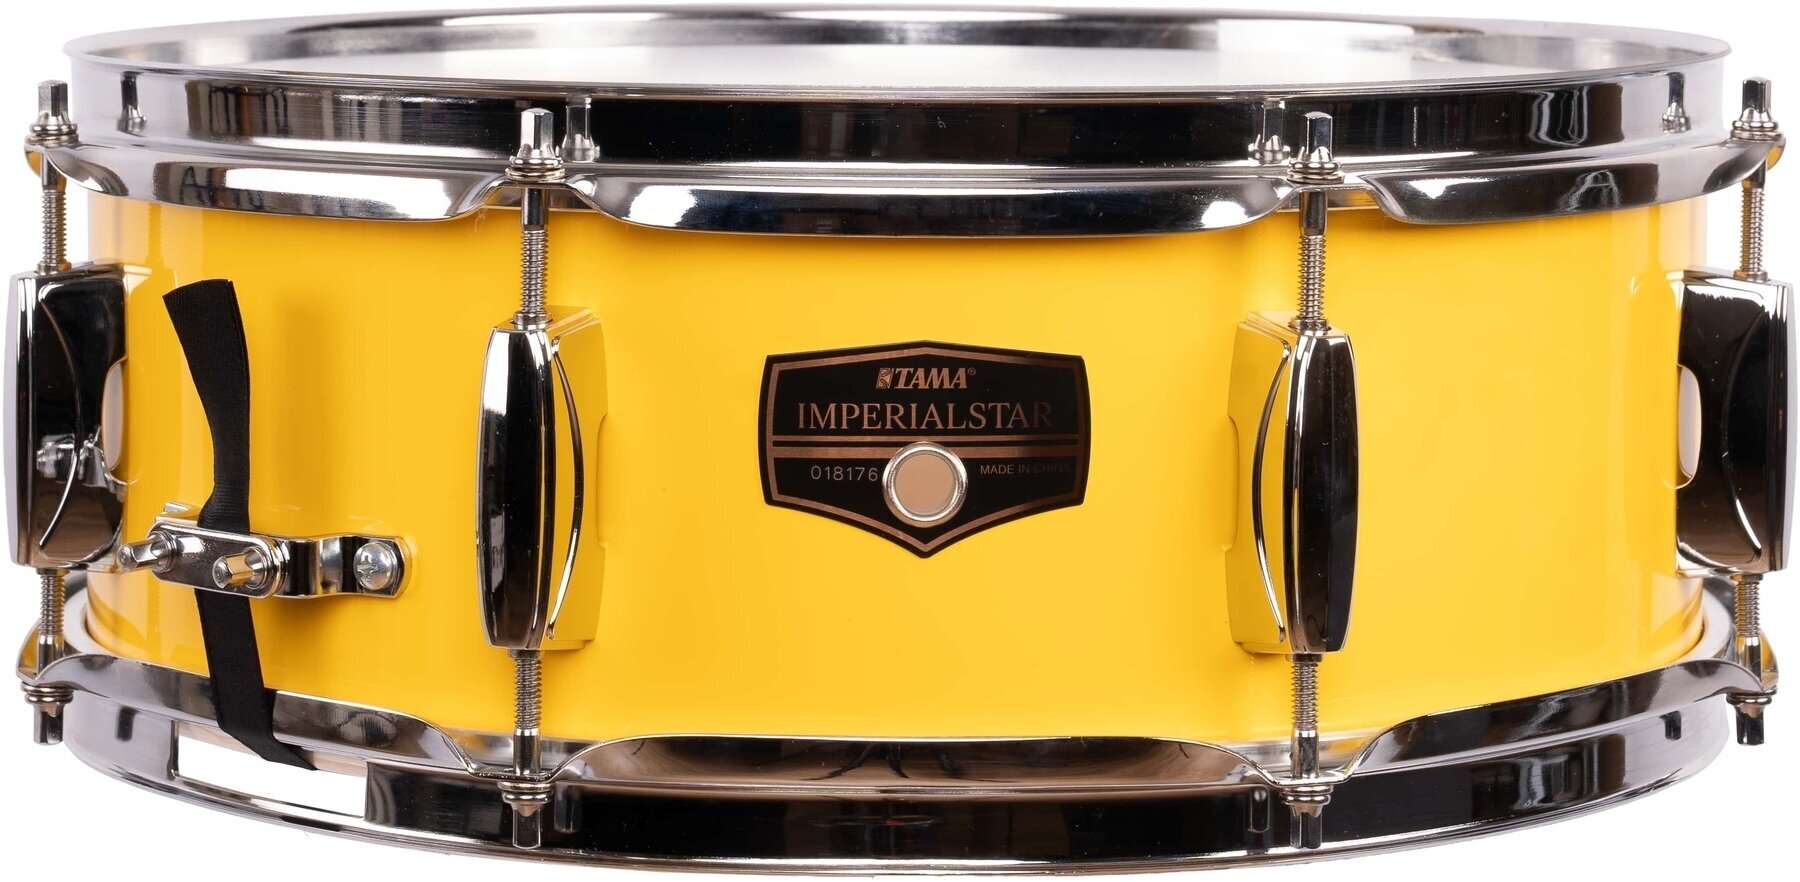 Caisse claire Tama IPS145-ELY 14" Electric Yellow